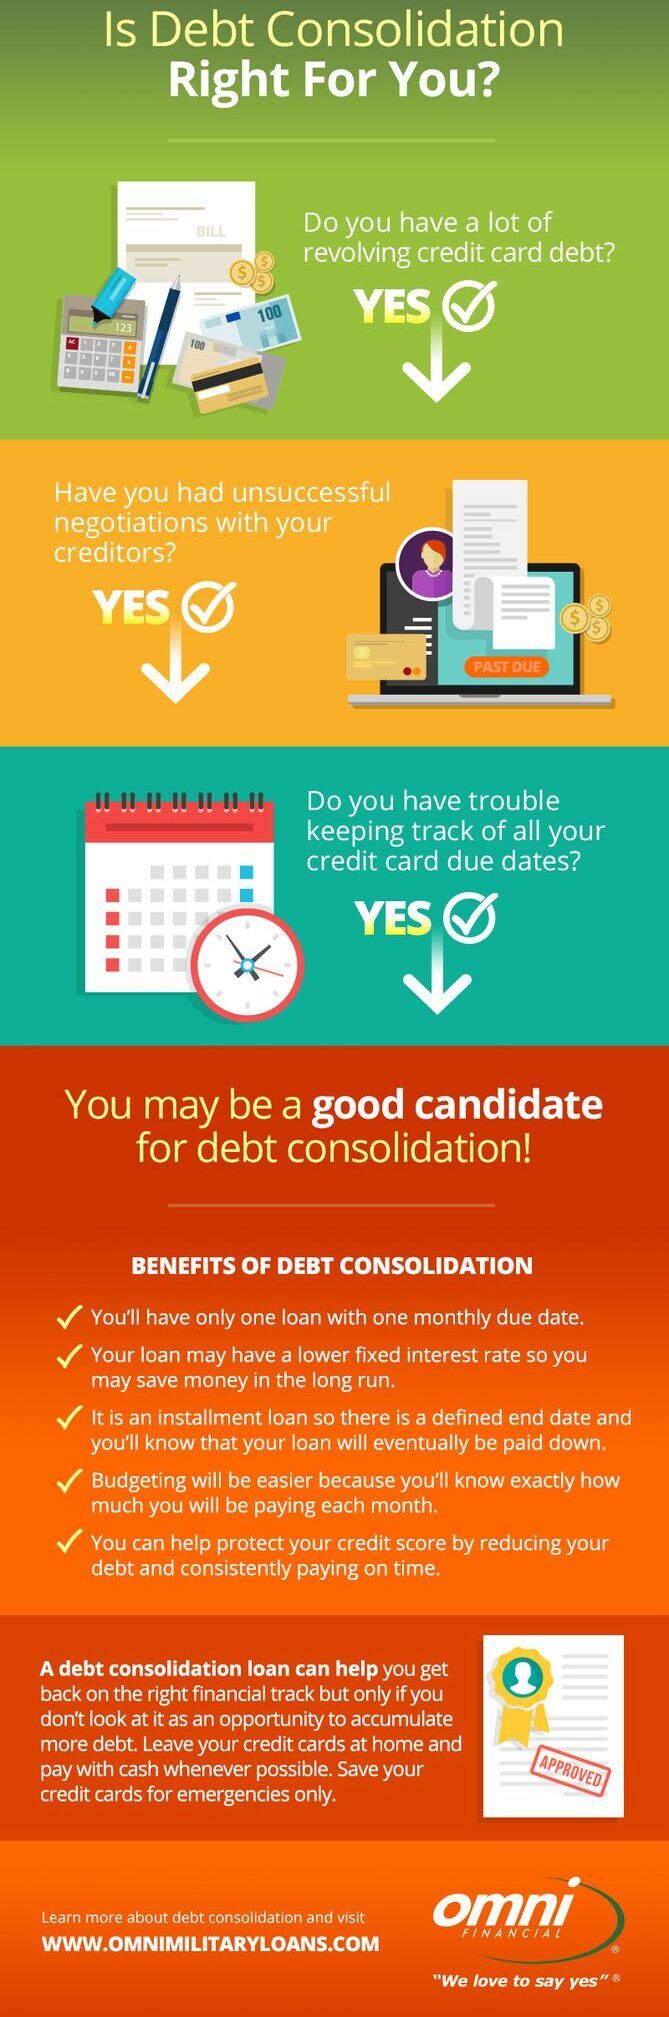 Should You Consider a Debt Consolidation Loan?